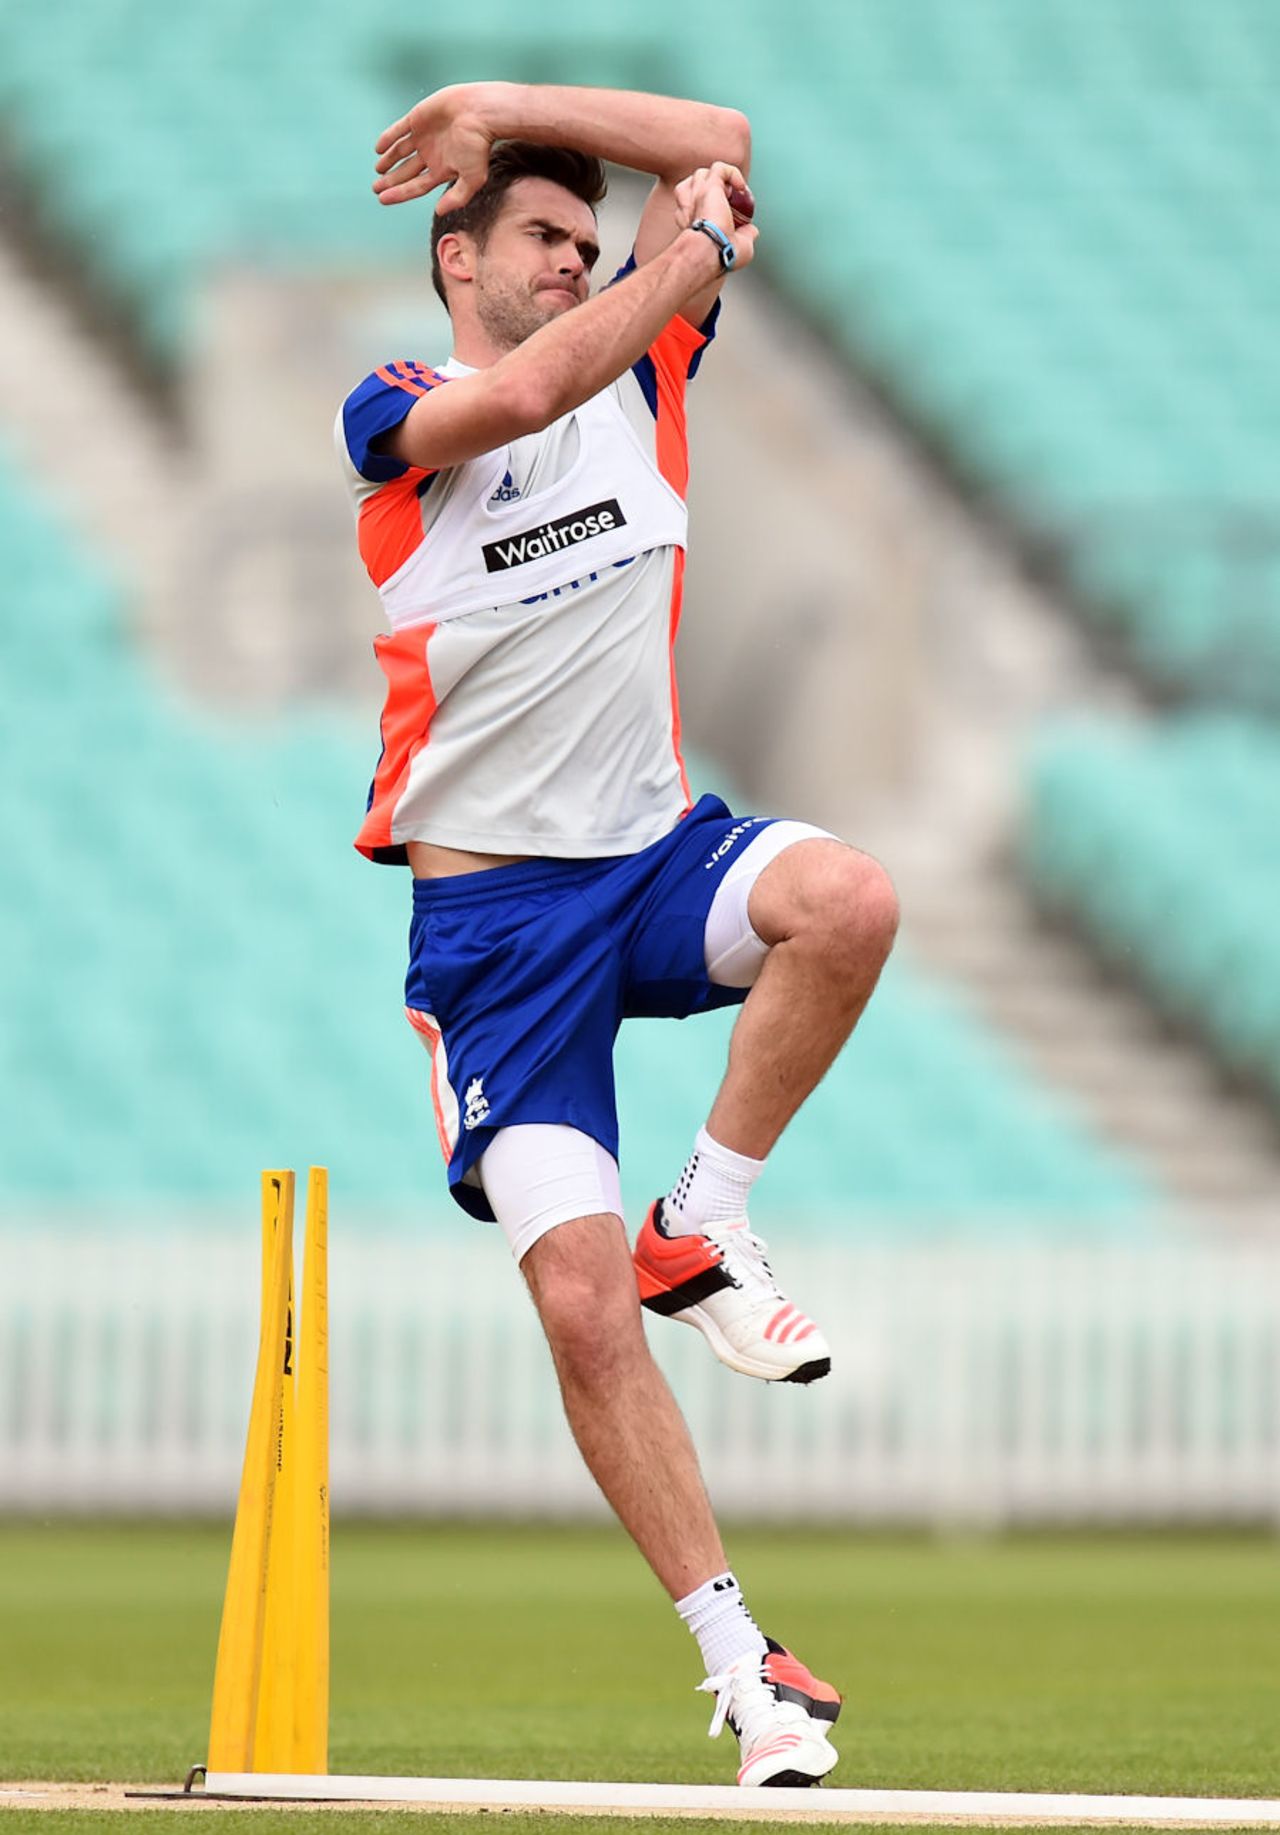 James Anderson undergoes a fitness test at The Oval after missing England's Ashes-winning display at Trent Bridge with a side strain, The Oval, August 18, 2015